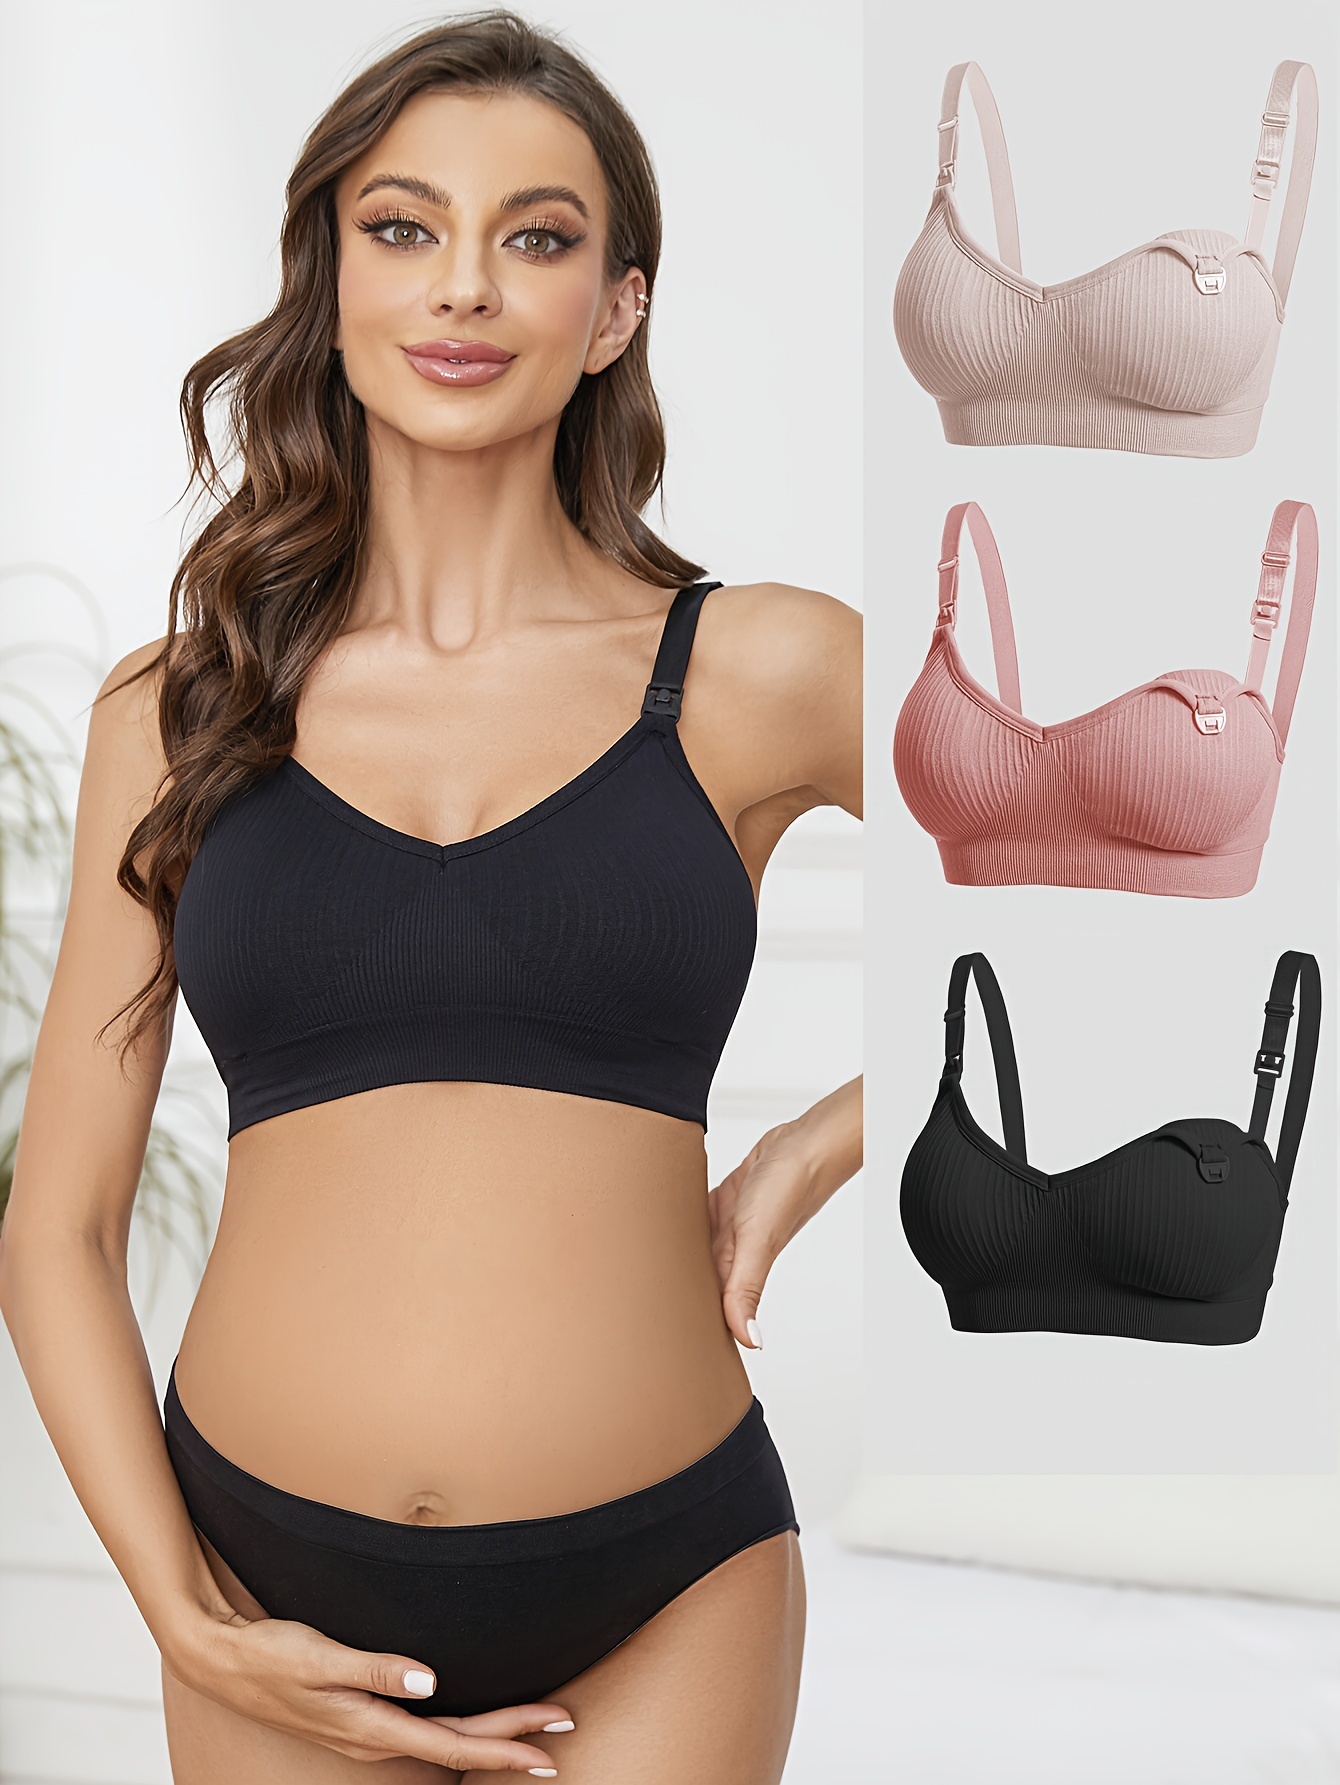  Women's Nursing Bras for Breastfeeding, Plus Size Cotton  Maternity Bras Support Wireless Bra, Pregnancy Sleep Bralette (Color :  Gray, Size : Small) : Clothing, Shoes & Jewelry